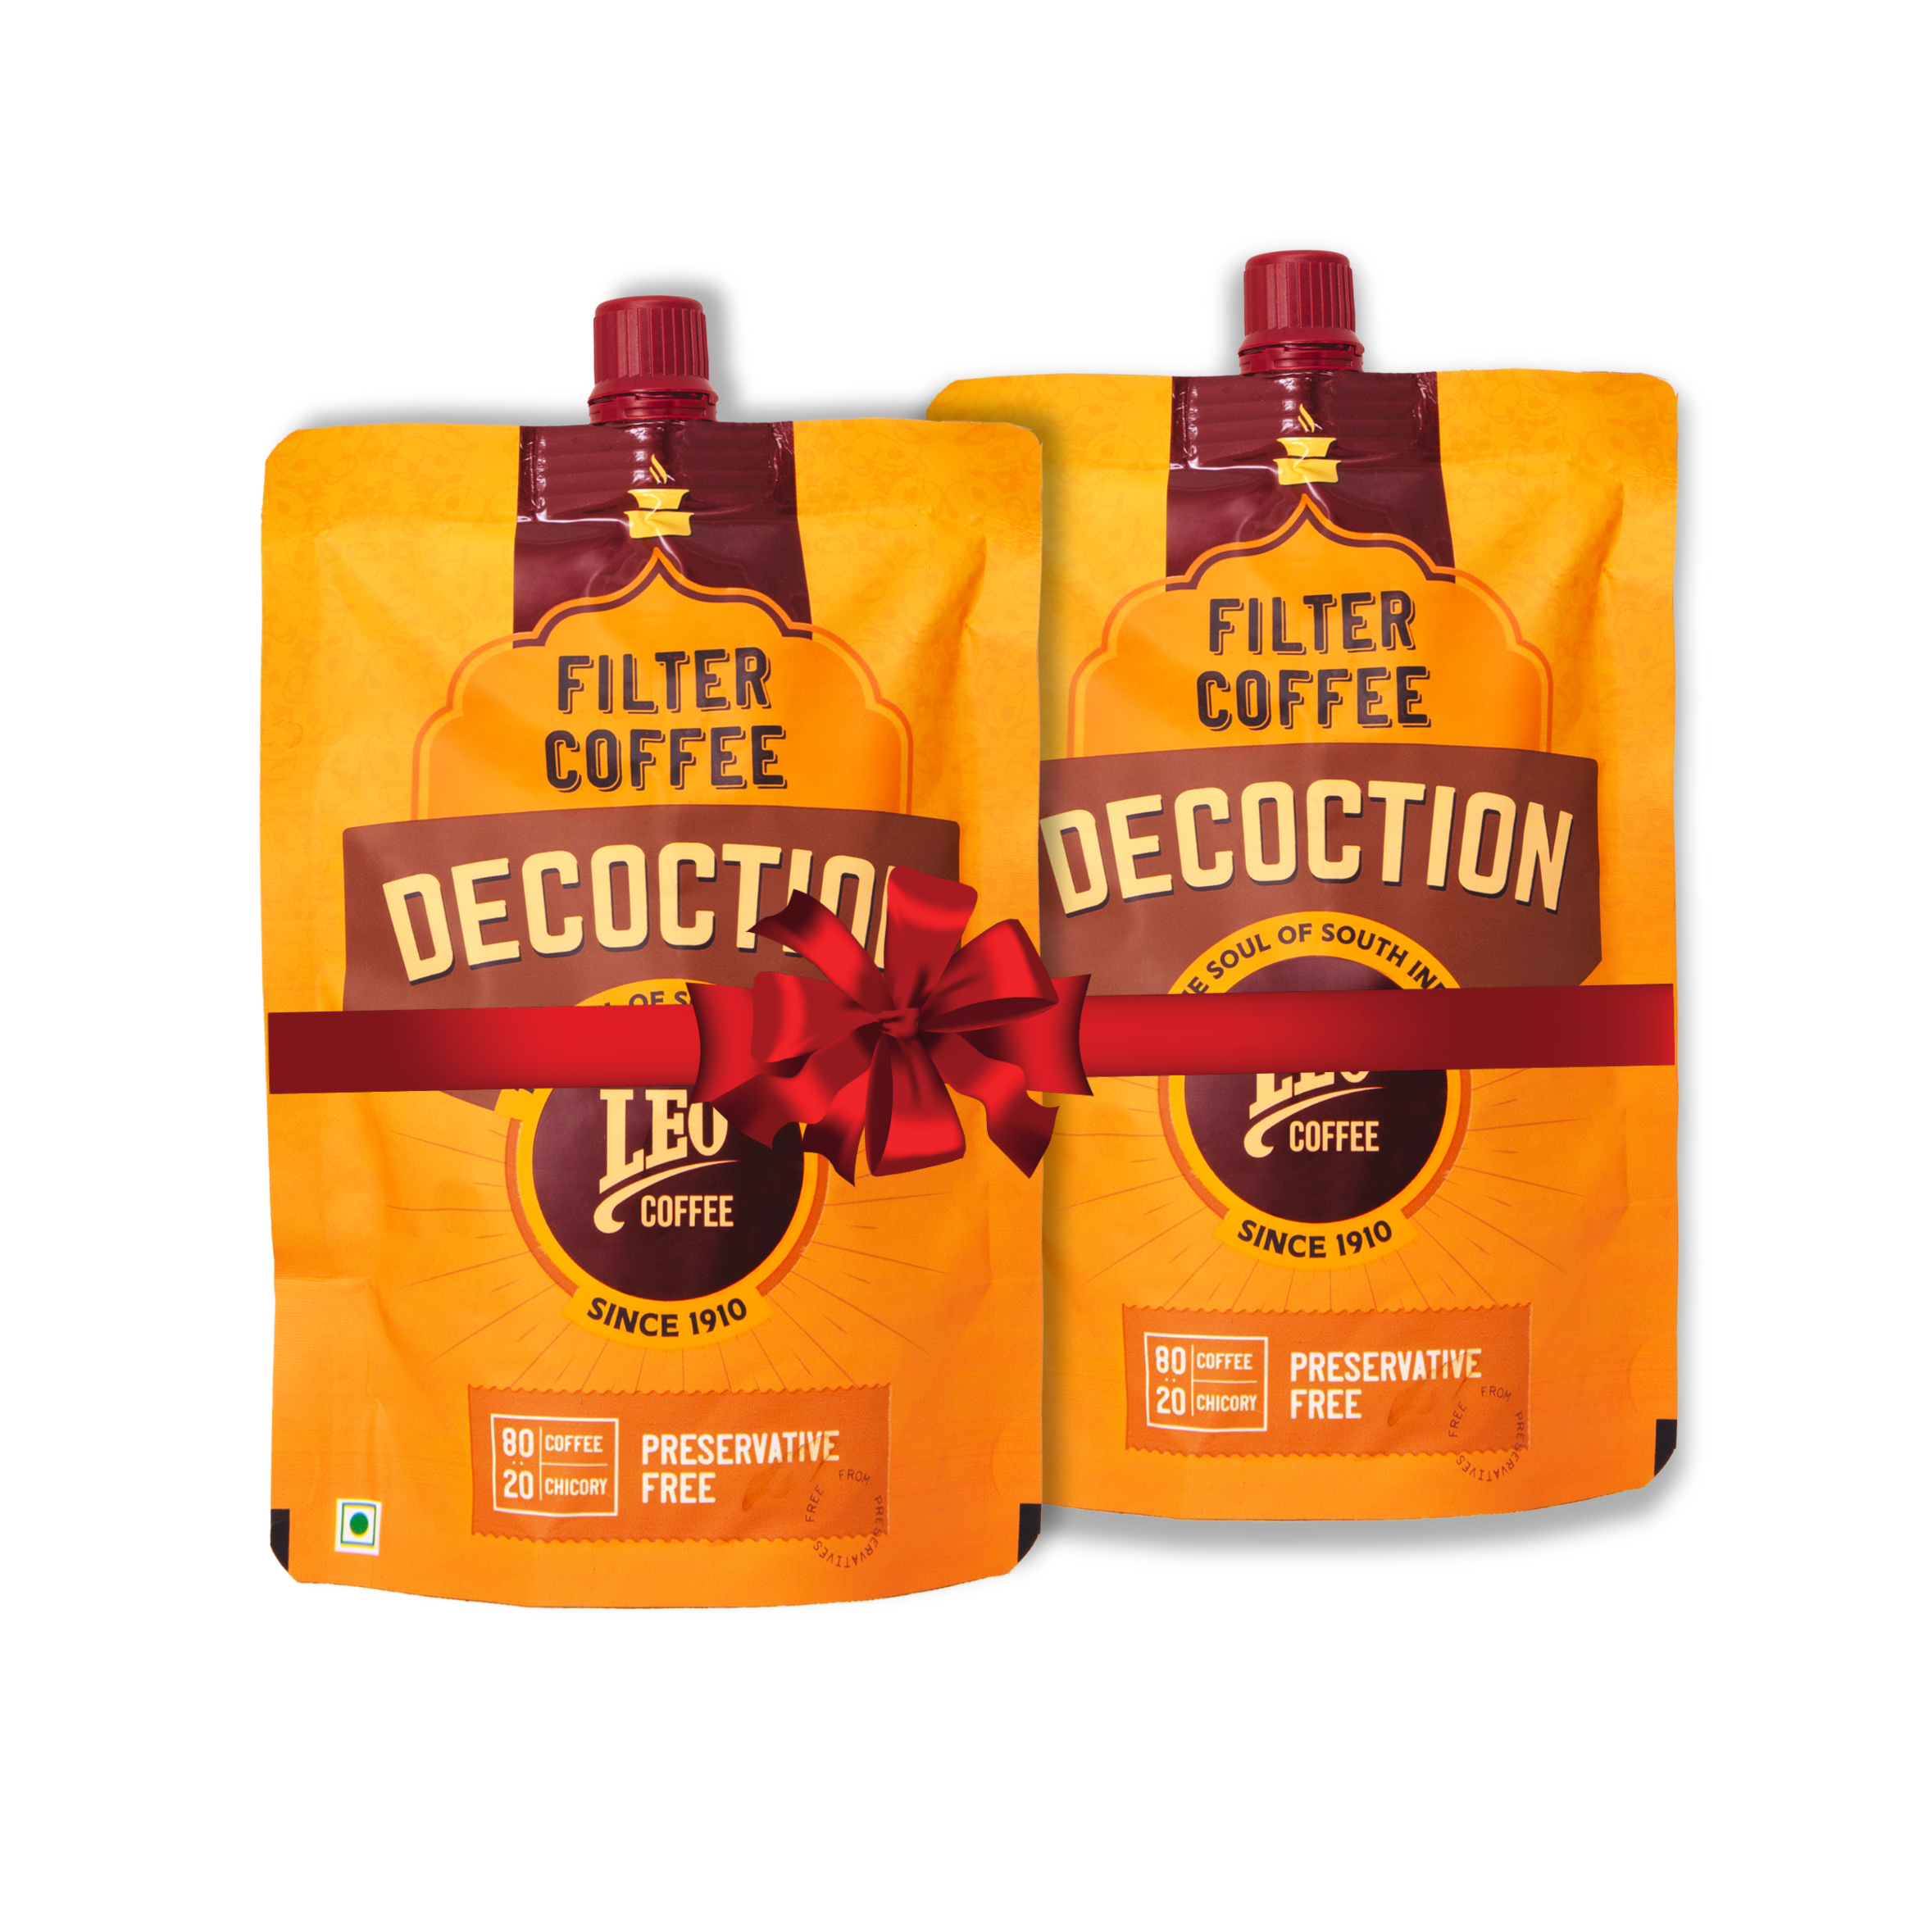 Leo Coffee India - Leo Filter Coffee Decoction - Pack of 2 product image